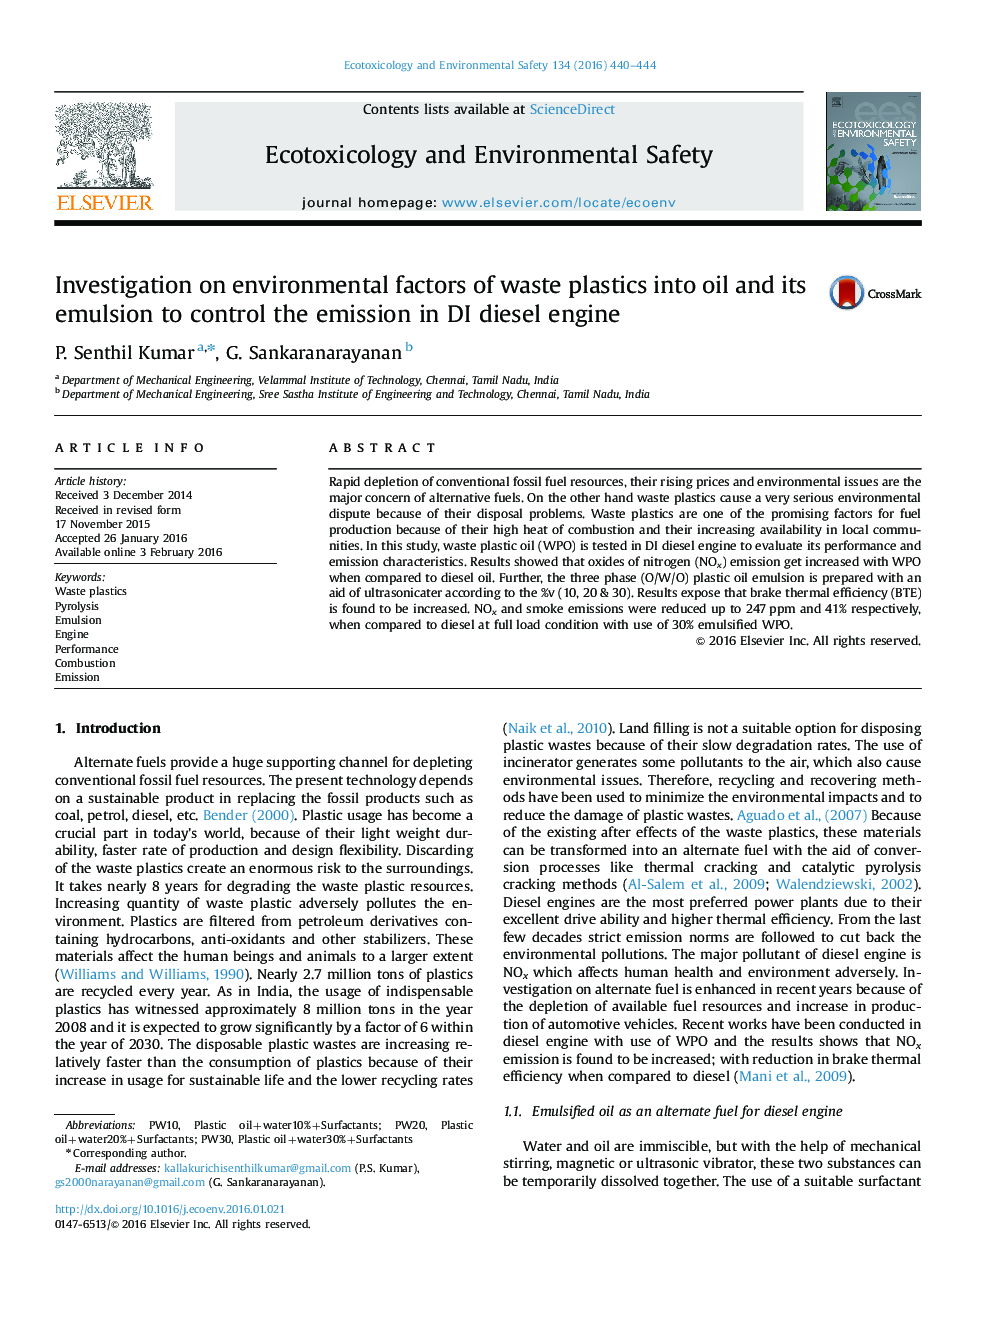 Investigation on environmental factors of waste plastics into oil and its emulsion to control the emission in DI diesel engine